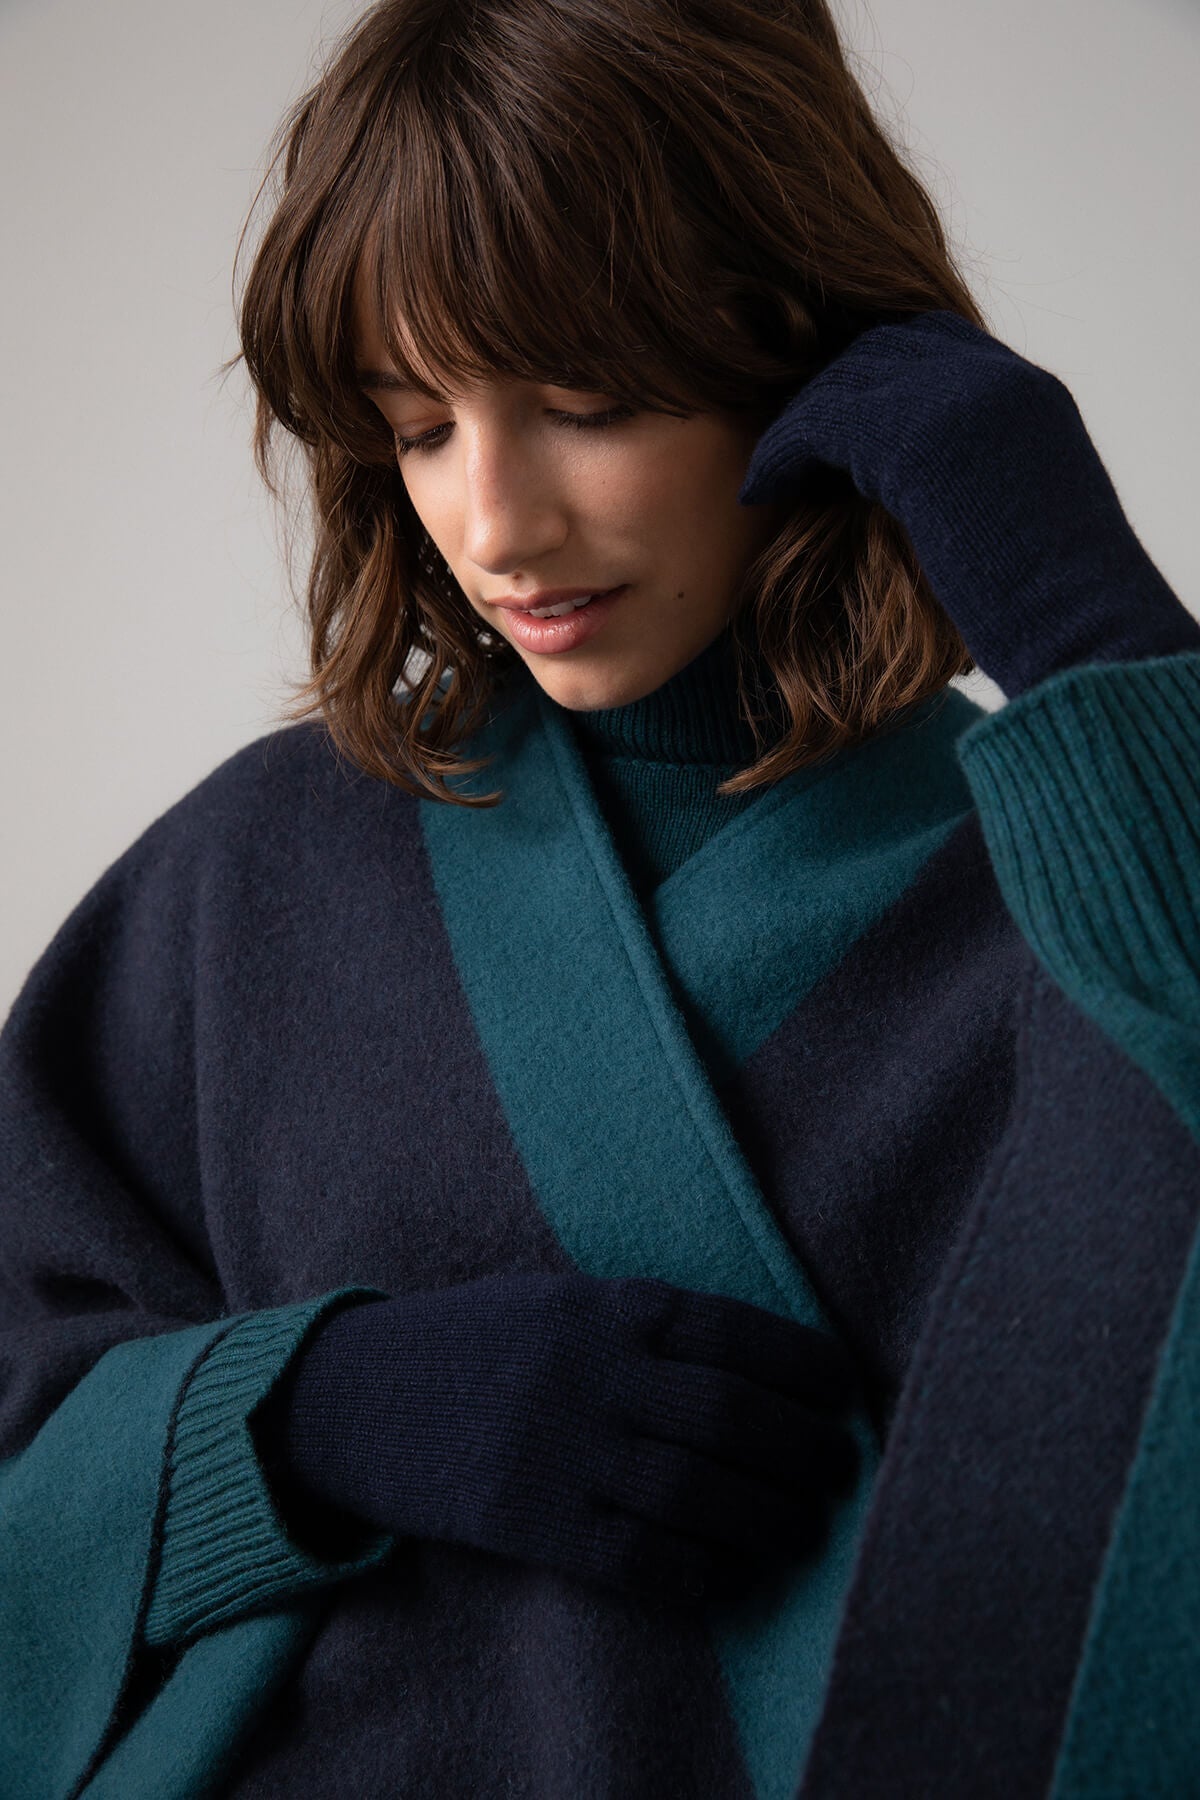 Model wearing Johnstons of Elgin Merino Wool Cape with Contrast Border in Mallard worn matching sweater and Navy Cashmere Gloves on a grey background TD000230RU7358ONE